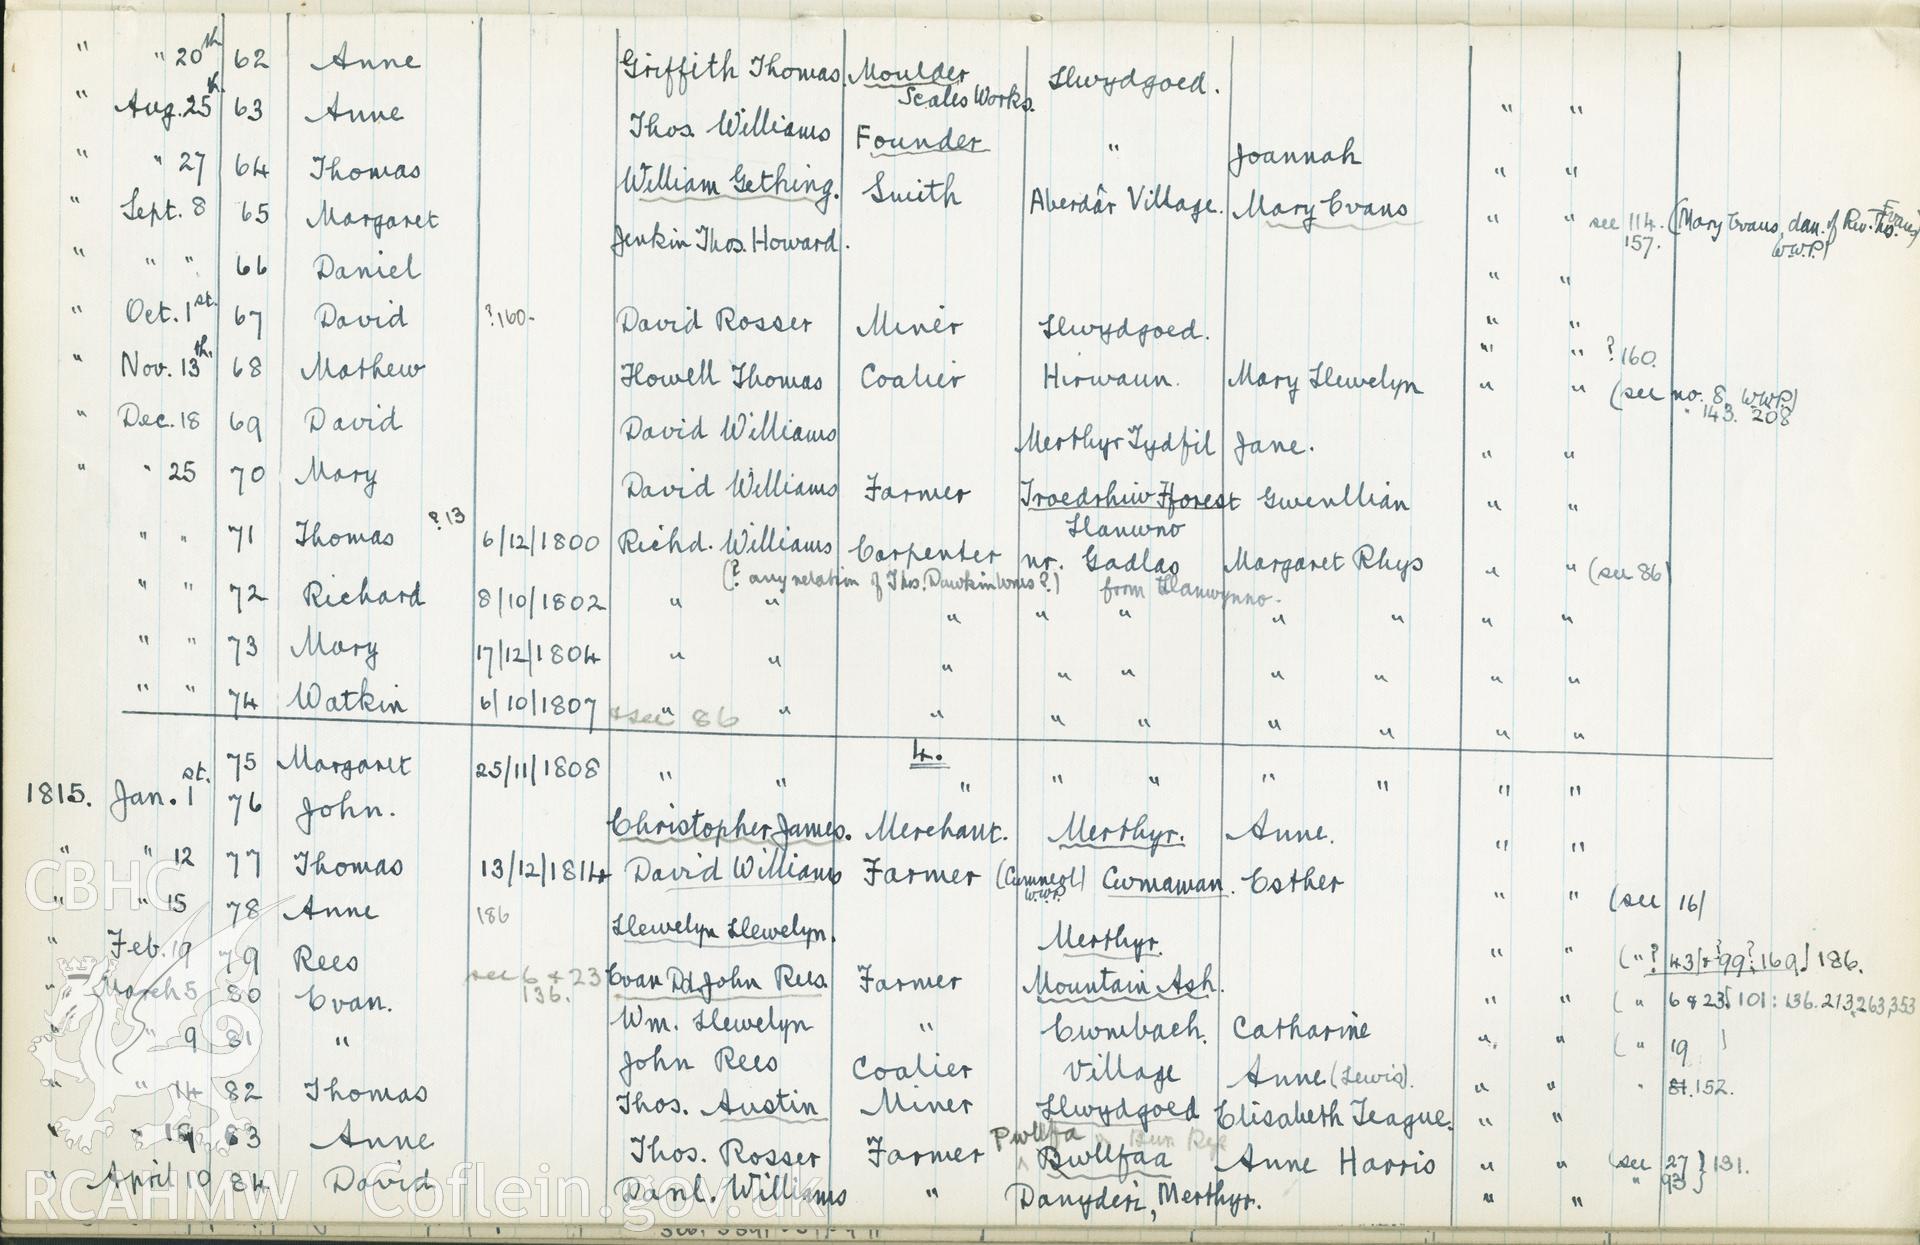 "Baptism Registered" book for Hen Dy Cwrdd, made between April 19th and 28th, 1941, by W. W. Price. Page listing baptisms from 20th July 1814 to 10th April 1815. Donated to the RCAHMW as part of the Digital Dissent Project.